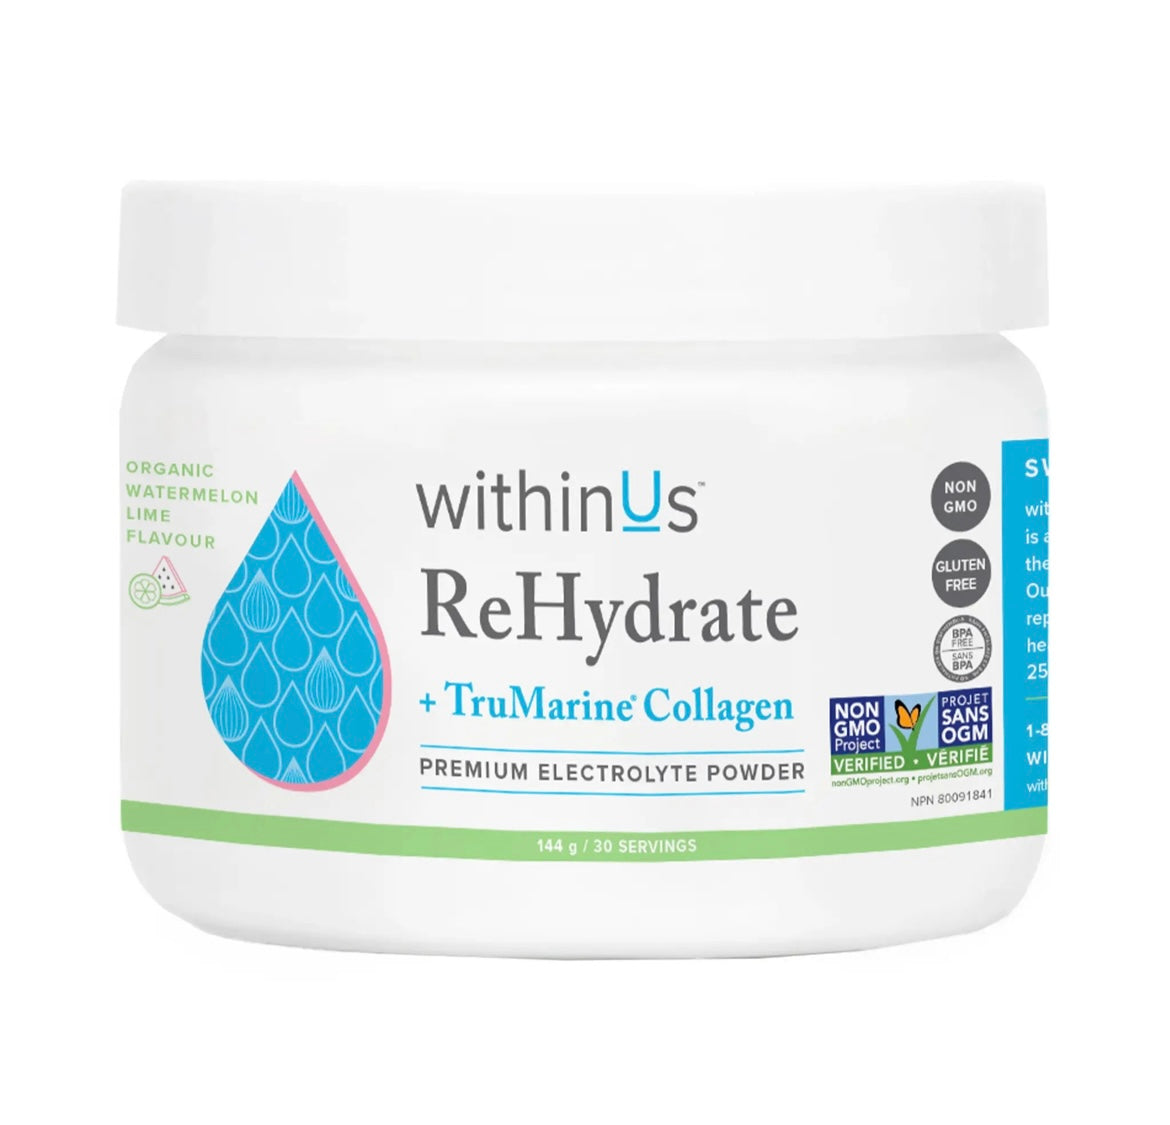 Rehydrate Collagen Watermelon Lime